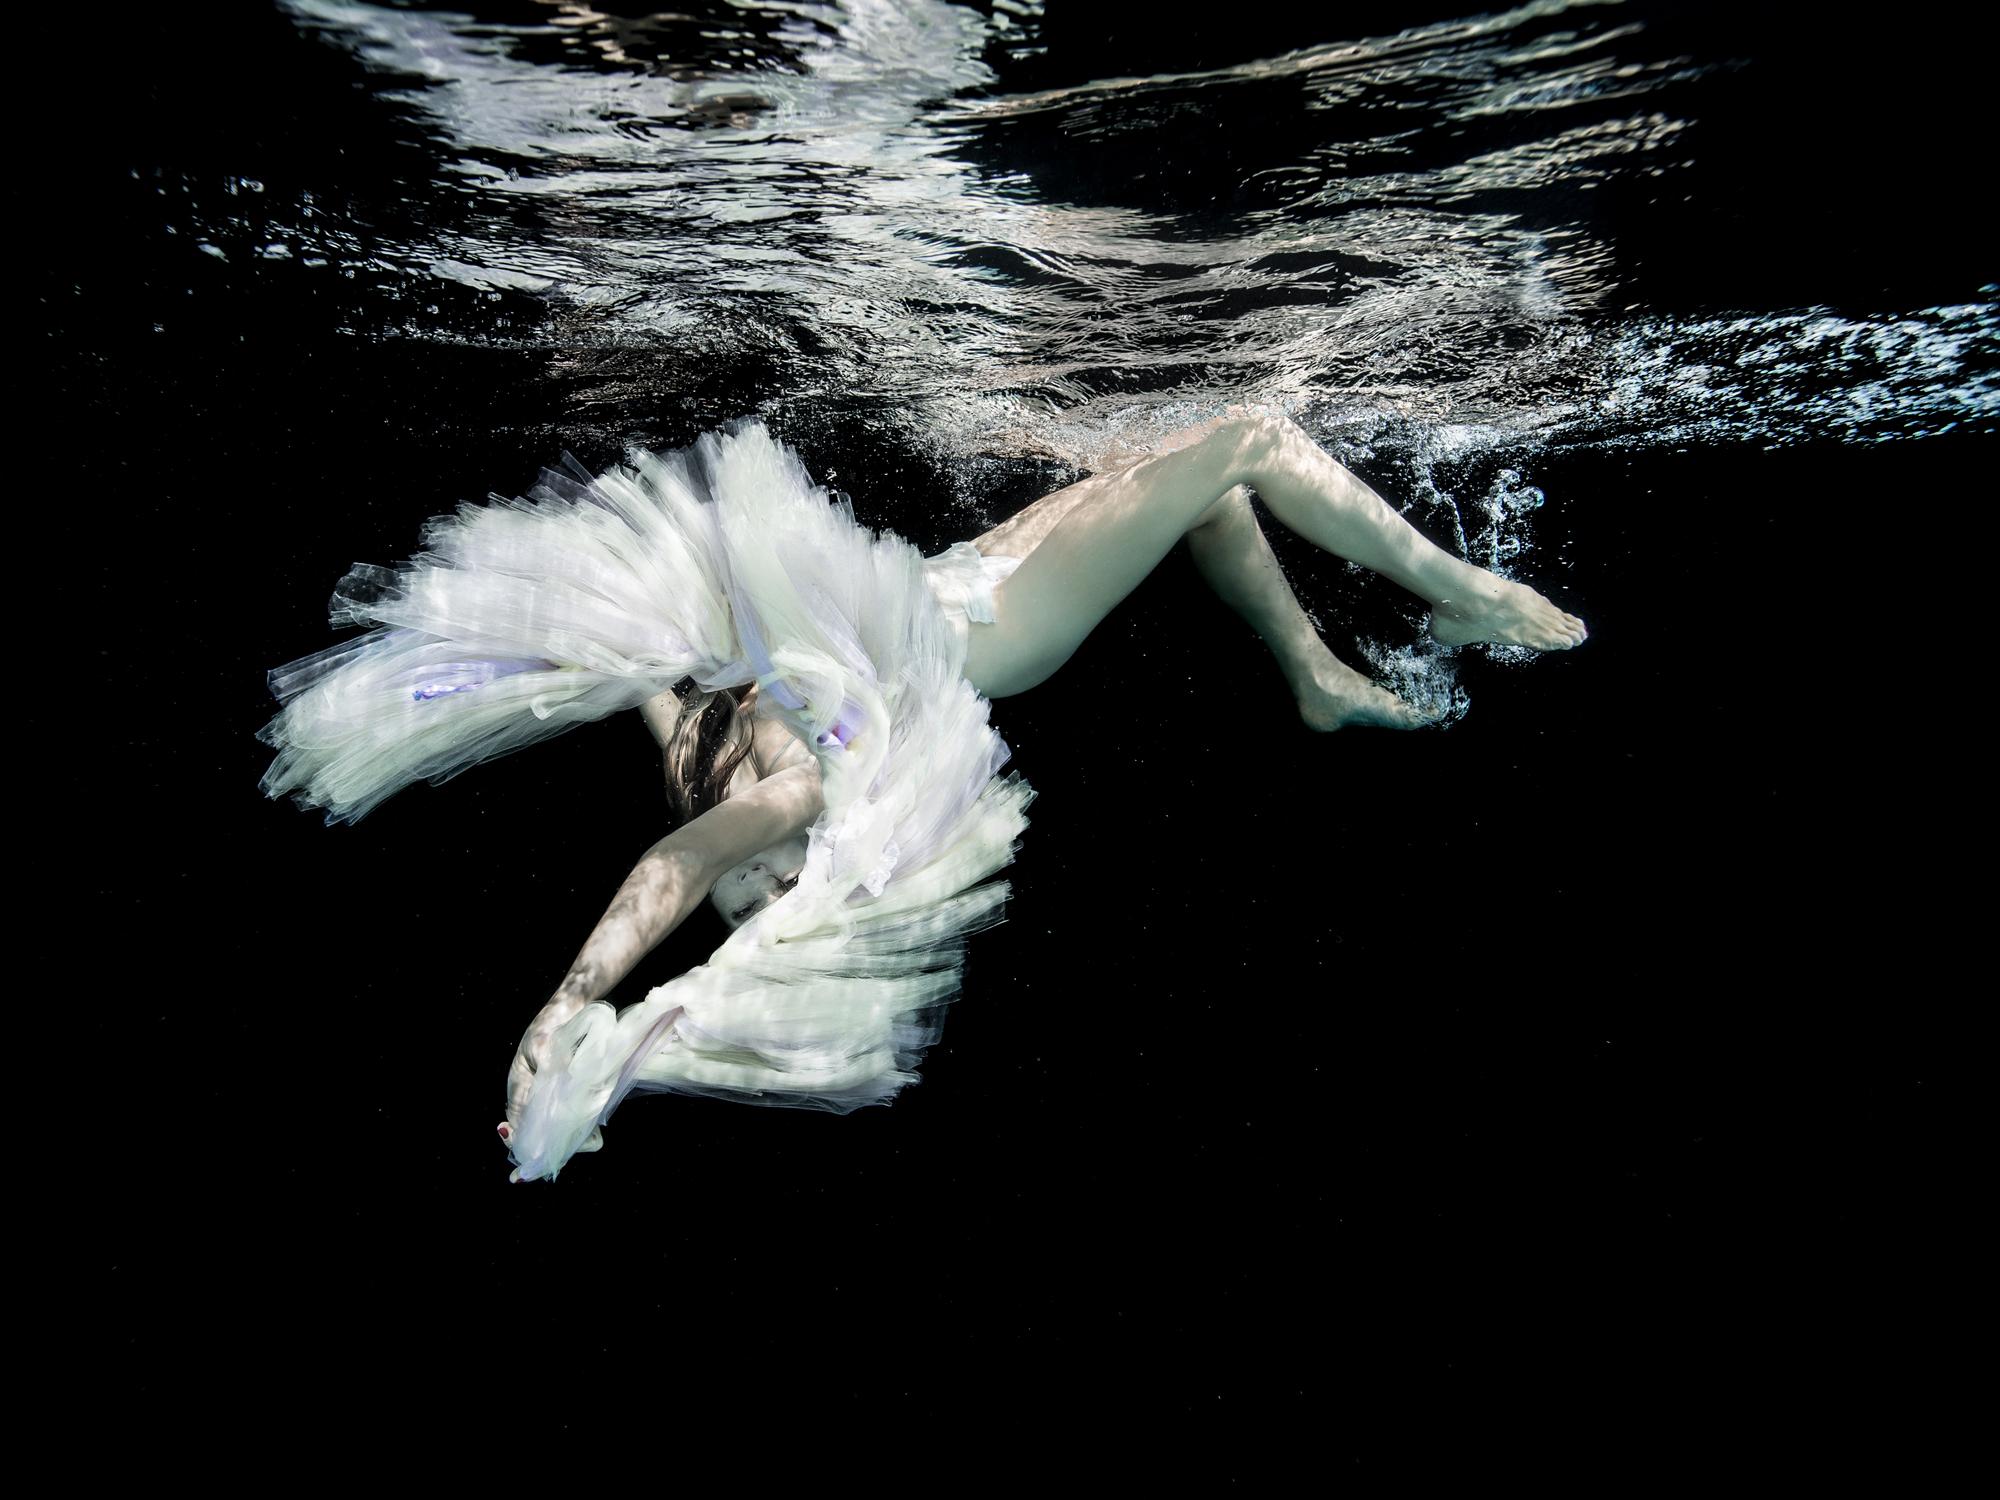 Alex Sher Nude Photograph - Ballet - underwater black and white nude photograph - archival pigment 27" x 35"